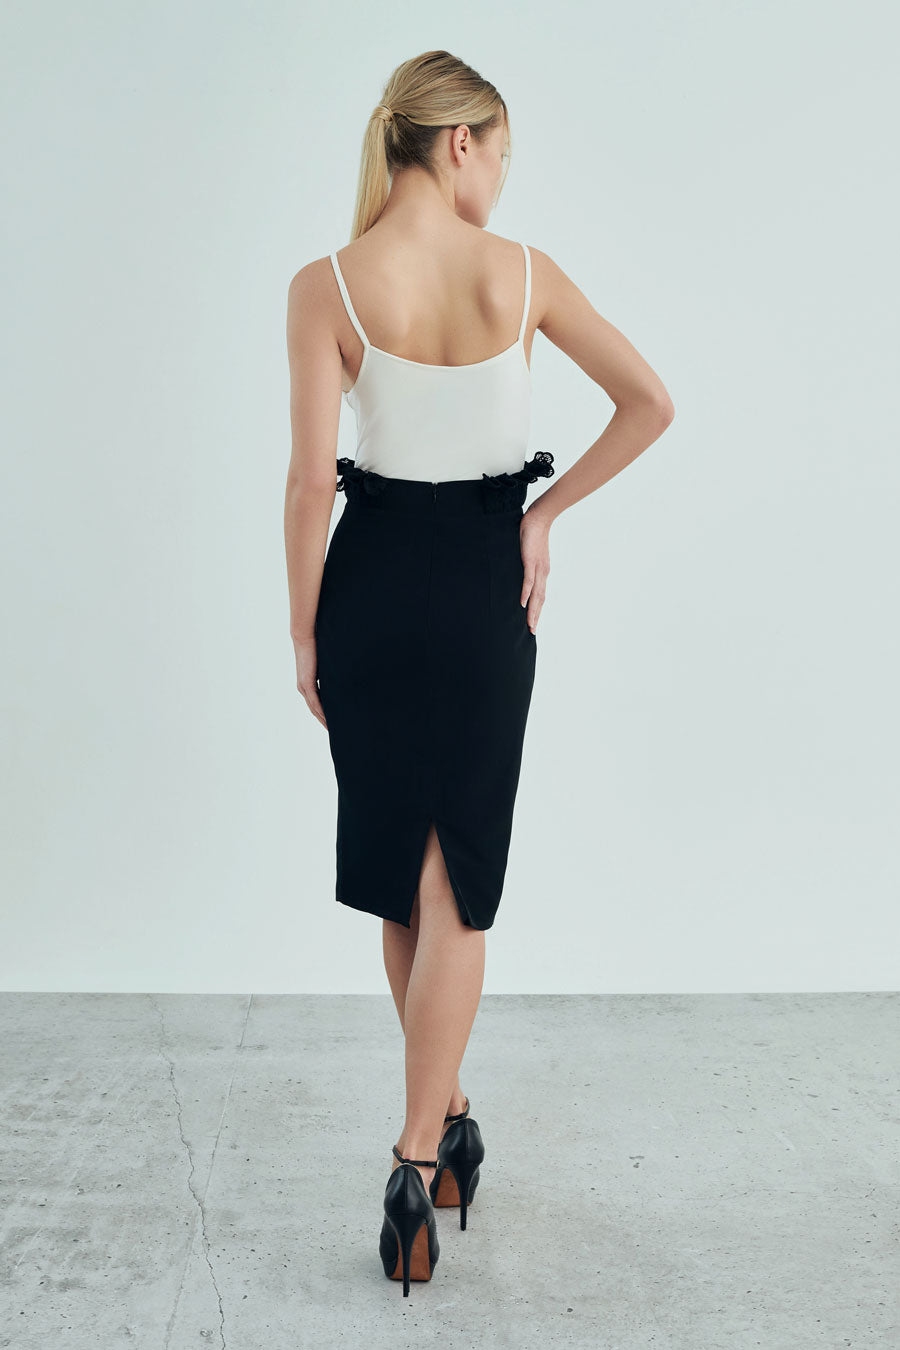 Nyonya & Monique - One set of top and pencil skirt